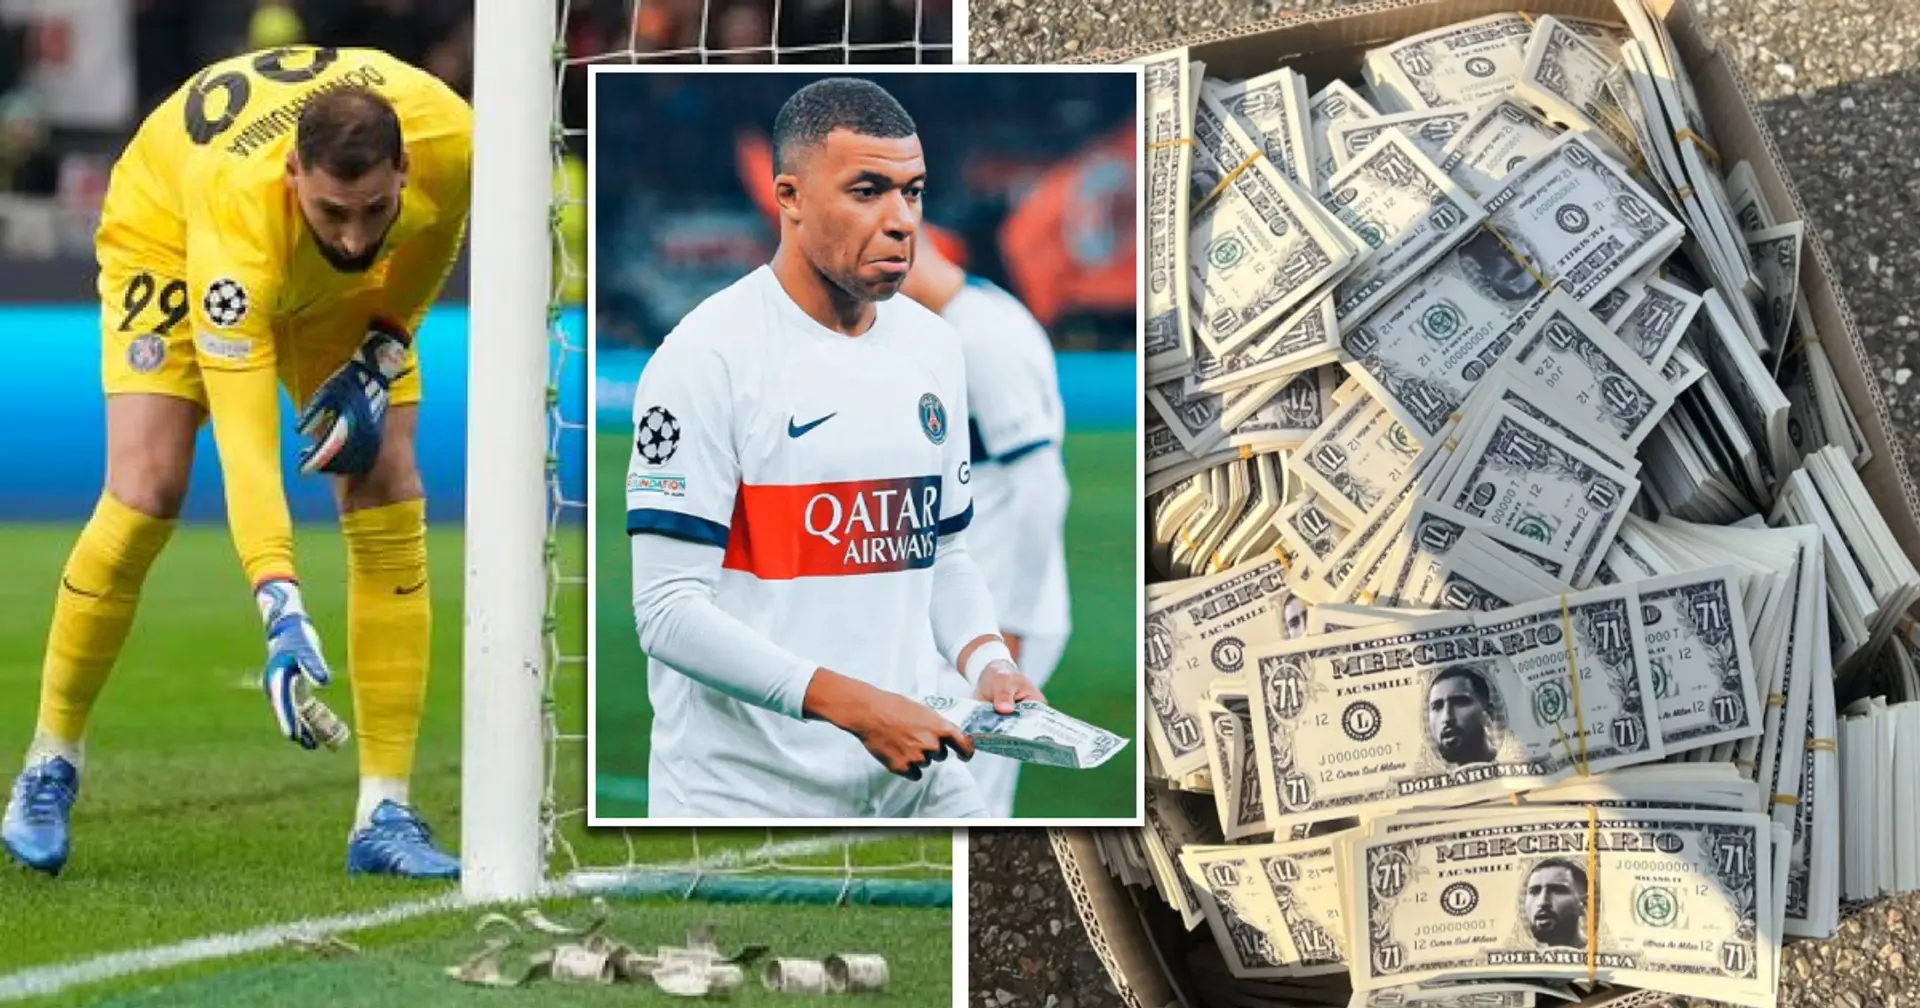 Gianluigi Donnarumma showered with 'Dollarumma' money by Milan fans -- Mbappe's reaction spotted 